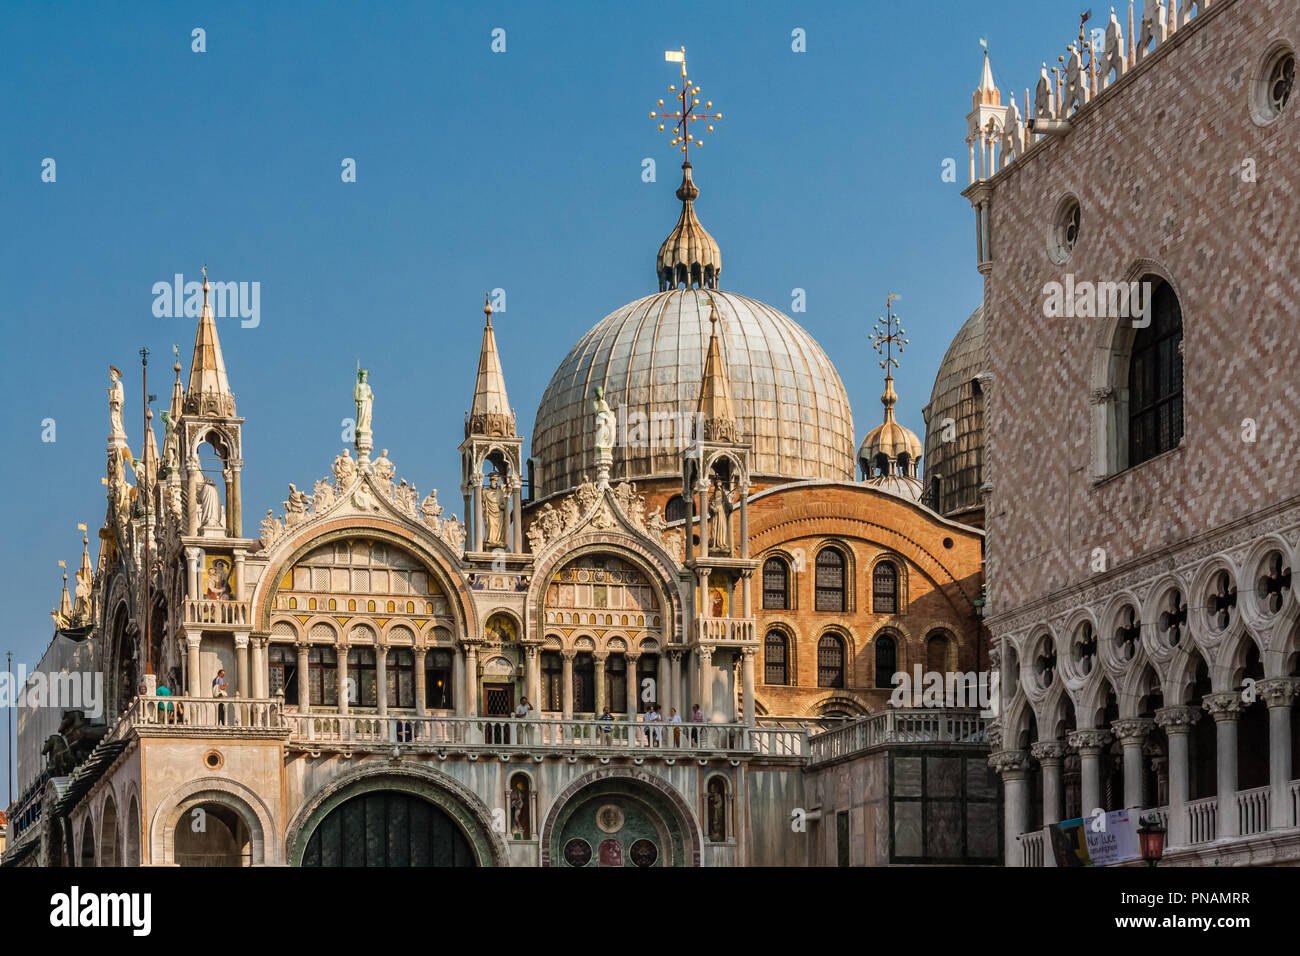 The unique architecture of St Mark's Basilica, Venice, with tourists on the balcony. Stock Photo